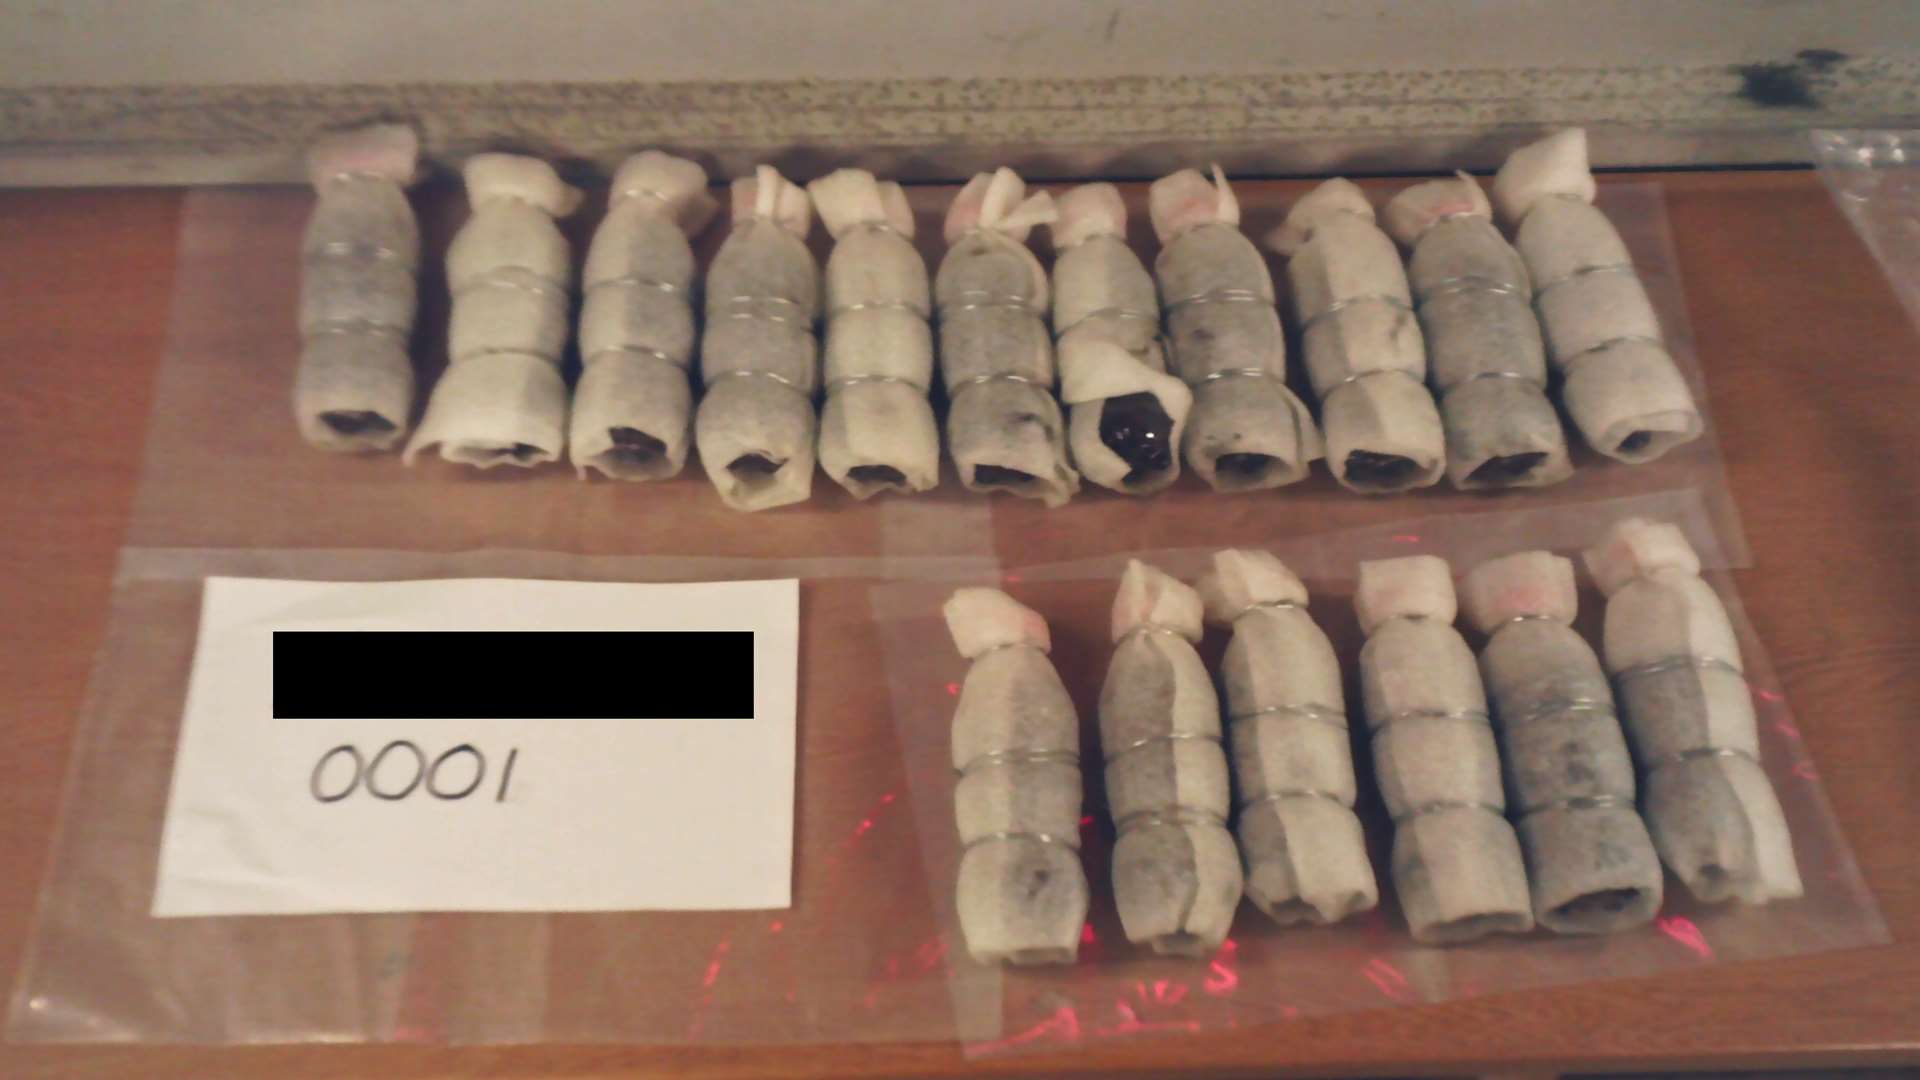 A search of the BMW found 17 bottles containing about 6kg of opium, with an estimated street value of more than £90,000. Picture: National Crime Agency